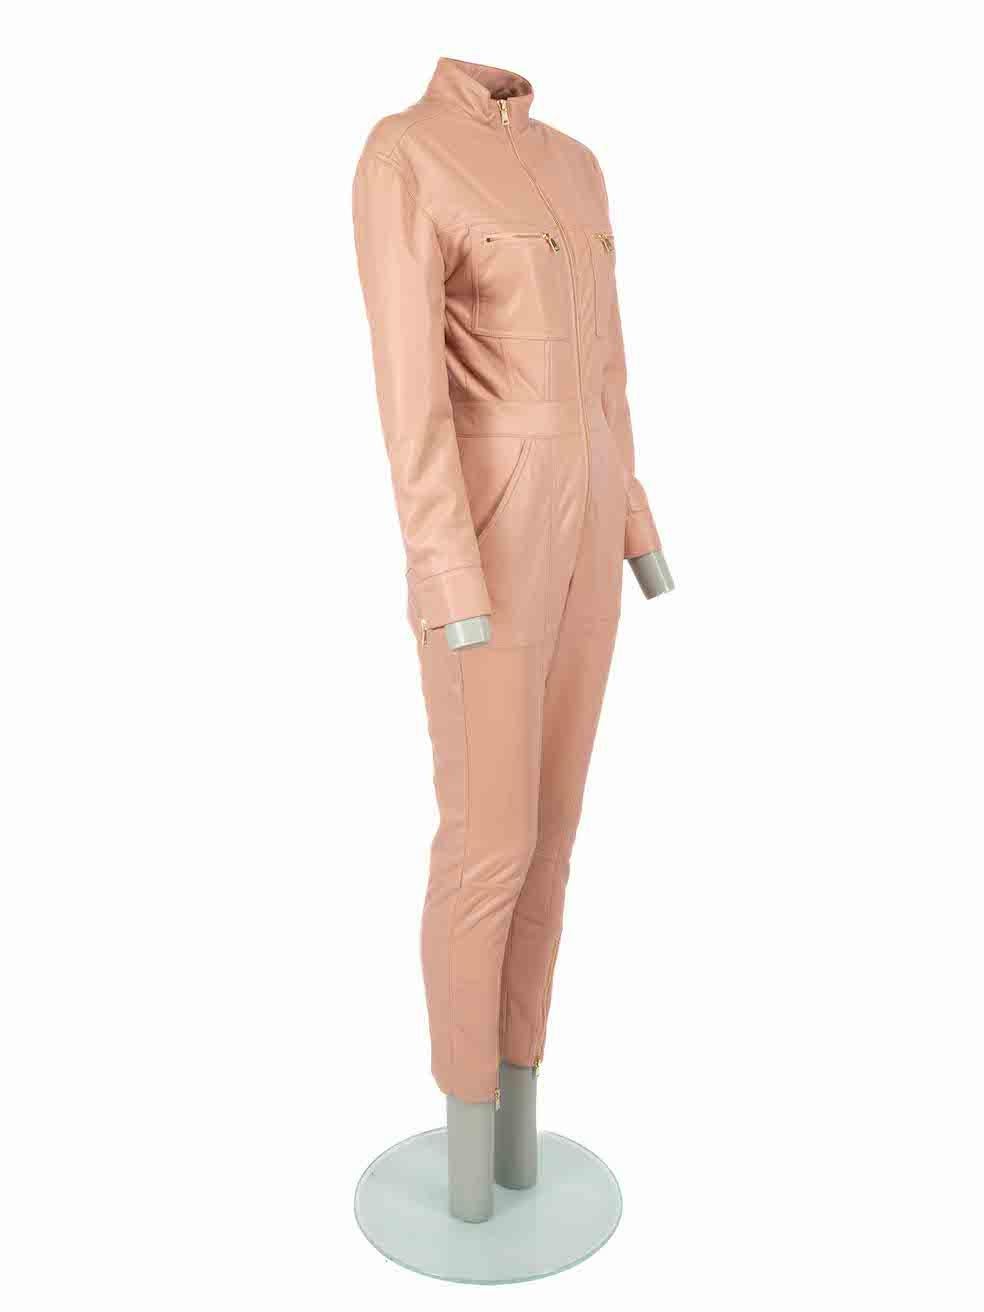 CONDITION is Never worn. No visible wear to jumpsuit is evident on this new Jonathan Simkhai designer resale item.
 
Details
Pink
Faux leather
Jumpsuit
Zip fastening
Zipped cuffs
4x Front pockets
2x Back pockets
Mock neck
Skinny leg
 
Made in China
